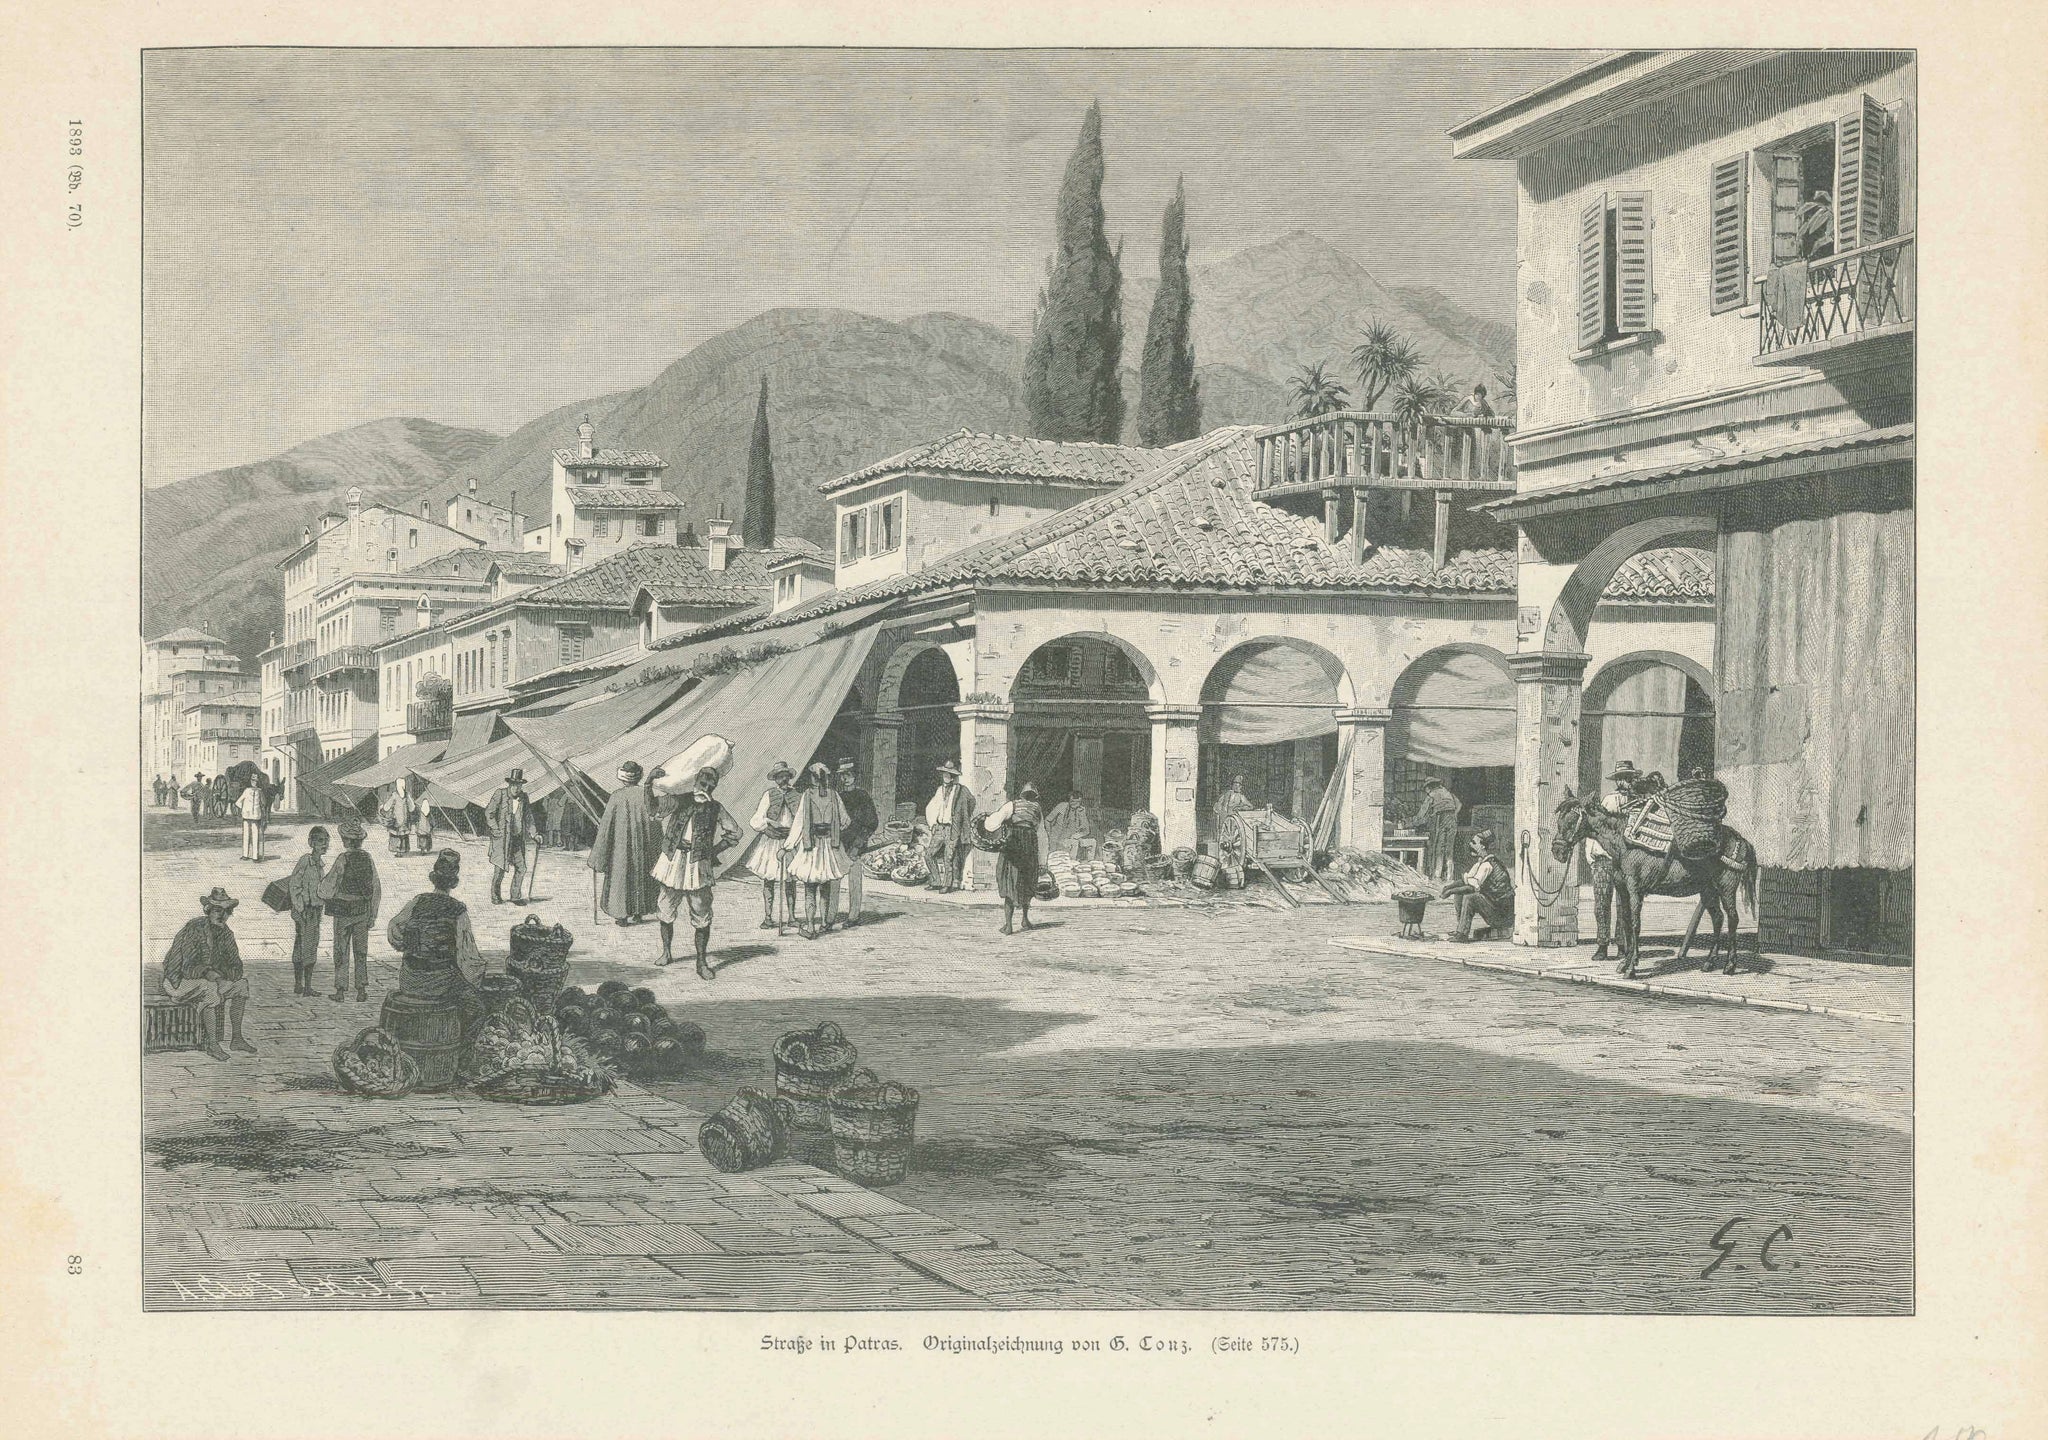 "Strasse in Patras"  Street in Patras, Greece  Wood engraving after G. Conz dated 1898.  Original antique print  